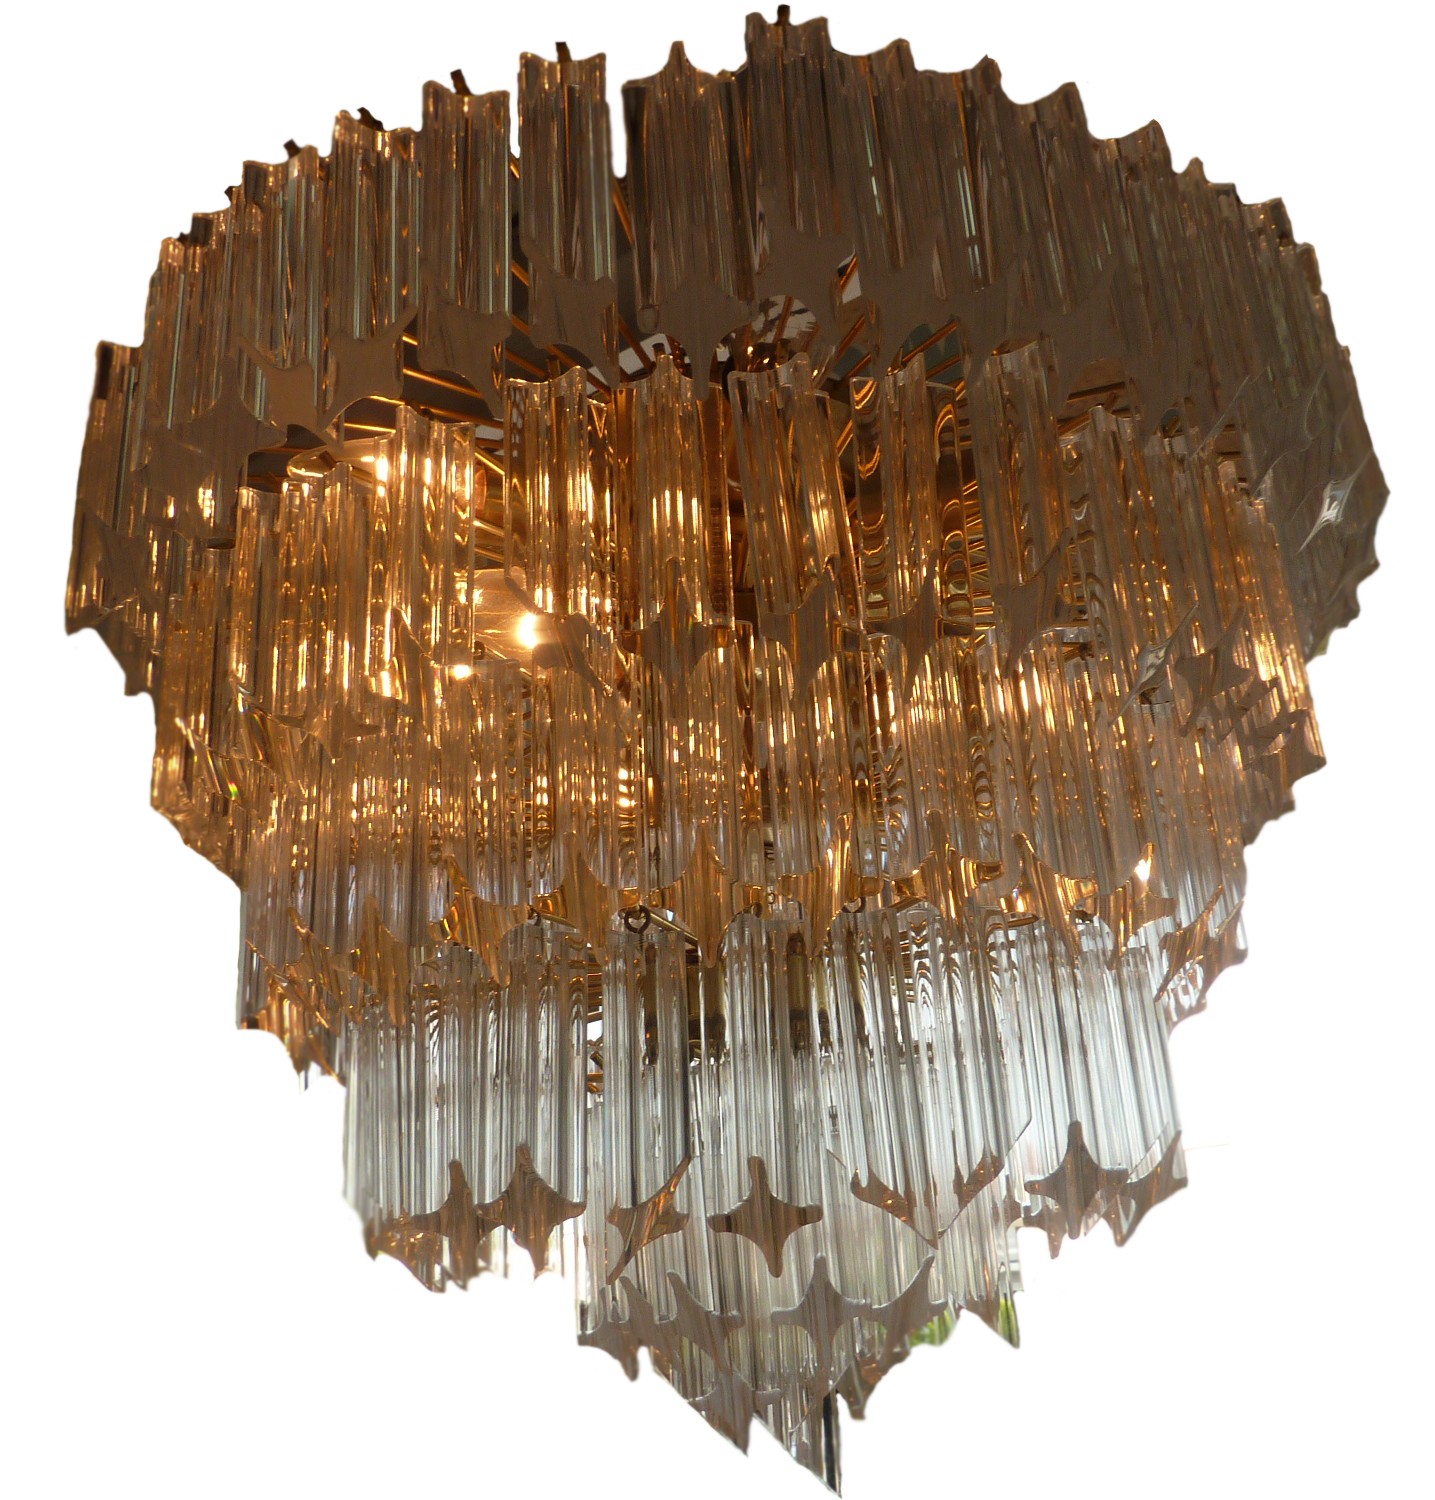 Lucite chandelier starcrossed cut - The Light Switch Miami